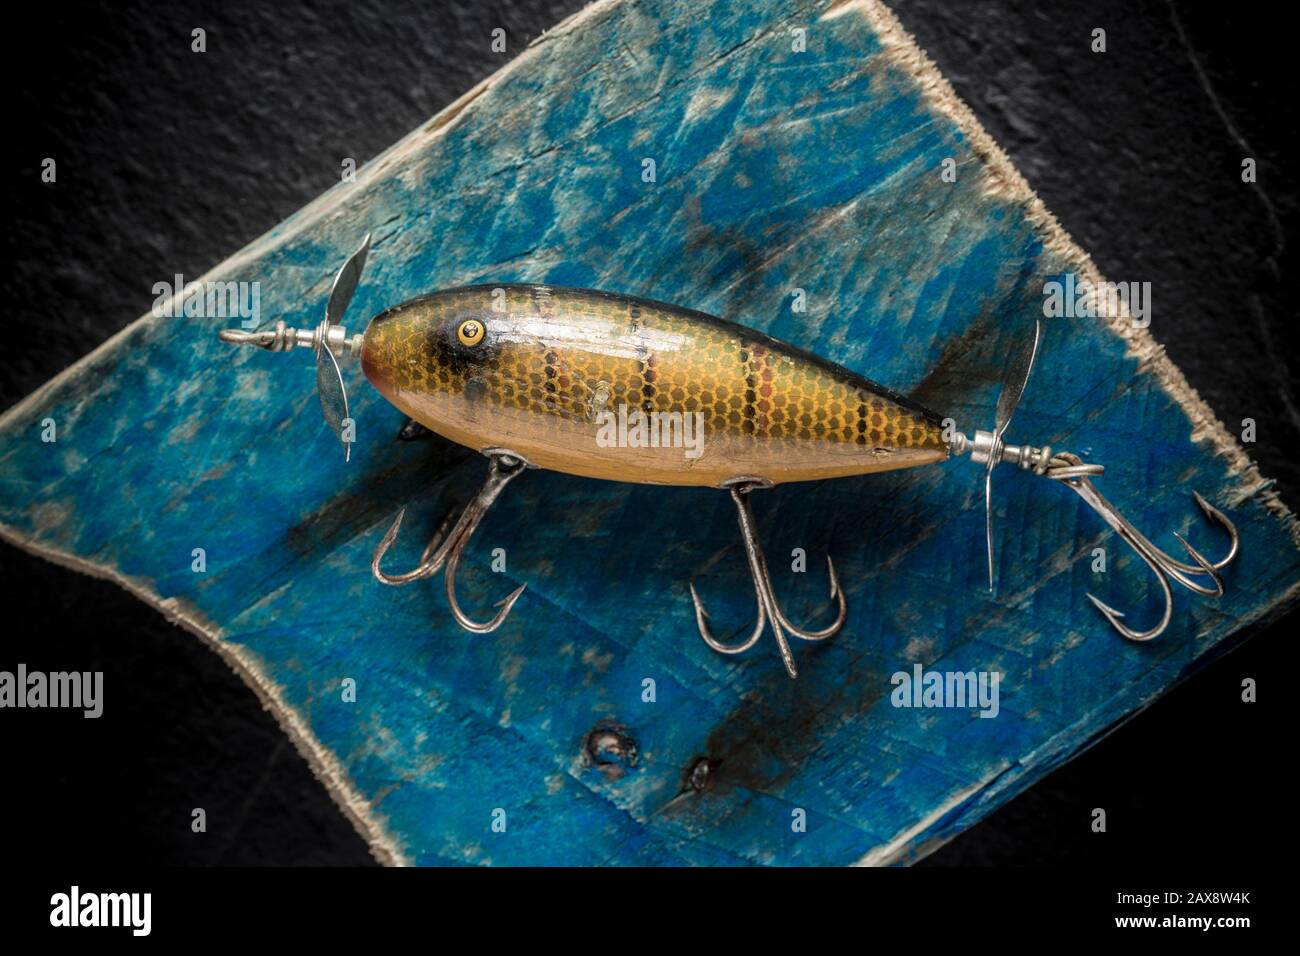 https://c8.alamy.com/comp/2AX8W4K/an-old-south-bend-fishing-lure-or-plug-designed-to-catch-predatory-fish-photographed-on-a-piece-of-driftwood-the-lure-came-from-a-collection-of-vi-2AX8W4K.jpg